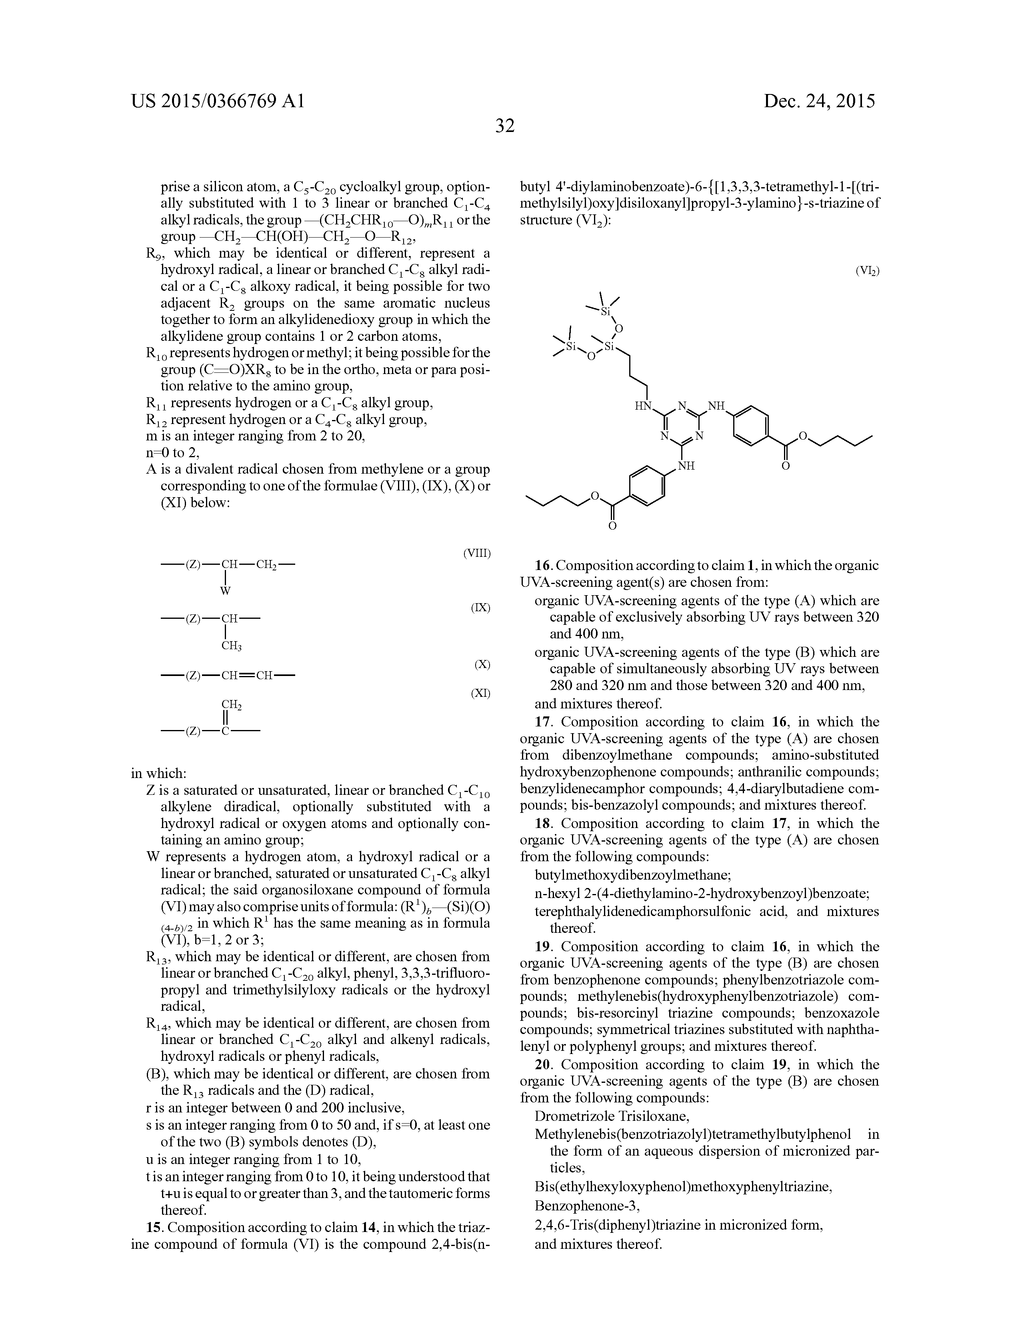 COSMETIC OR DERMATOLOGICAL COMPOSITION COMPRISING A MEROCYANINE, AN     ORGANIC UVB-SCREENING AGENT AND AN ADDITIONAL ORGANIC UVA-SCREENING AGENT - diagram, schematic, and image 33